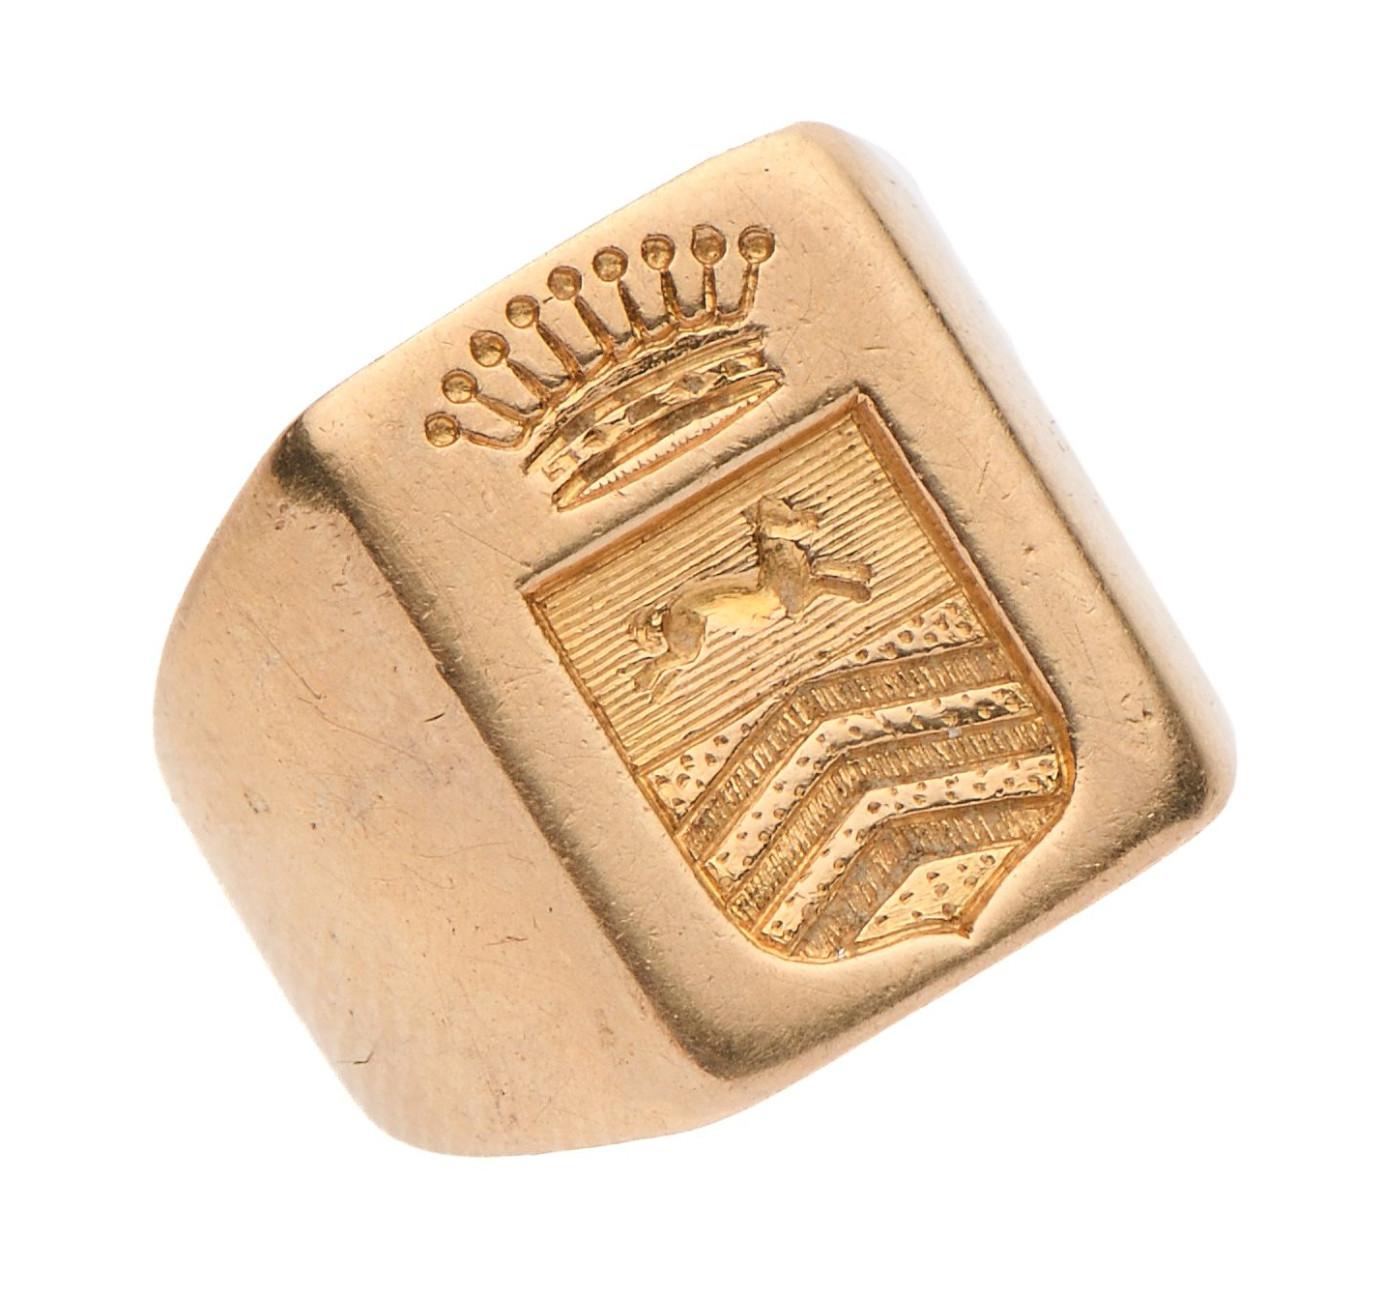 Signet ring in 18k yellow gold engraved with a coat of arms with three chevrons, a horse and surmounted by a county crown. 
Ring size:7 1/2
Gross weight: 12.48 g